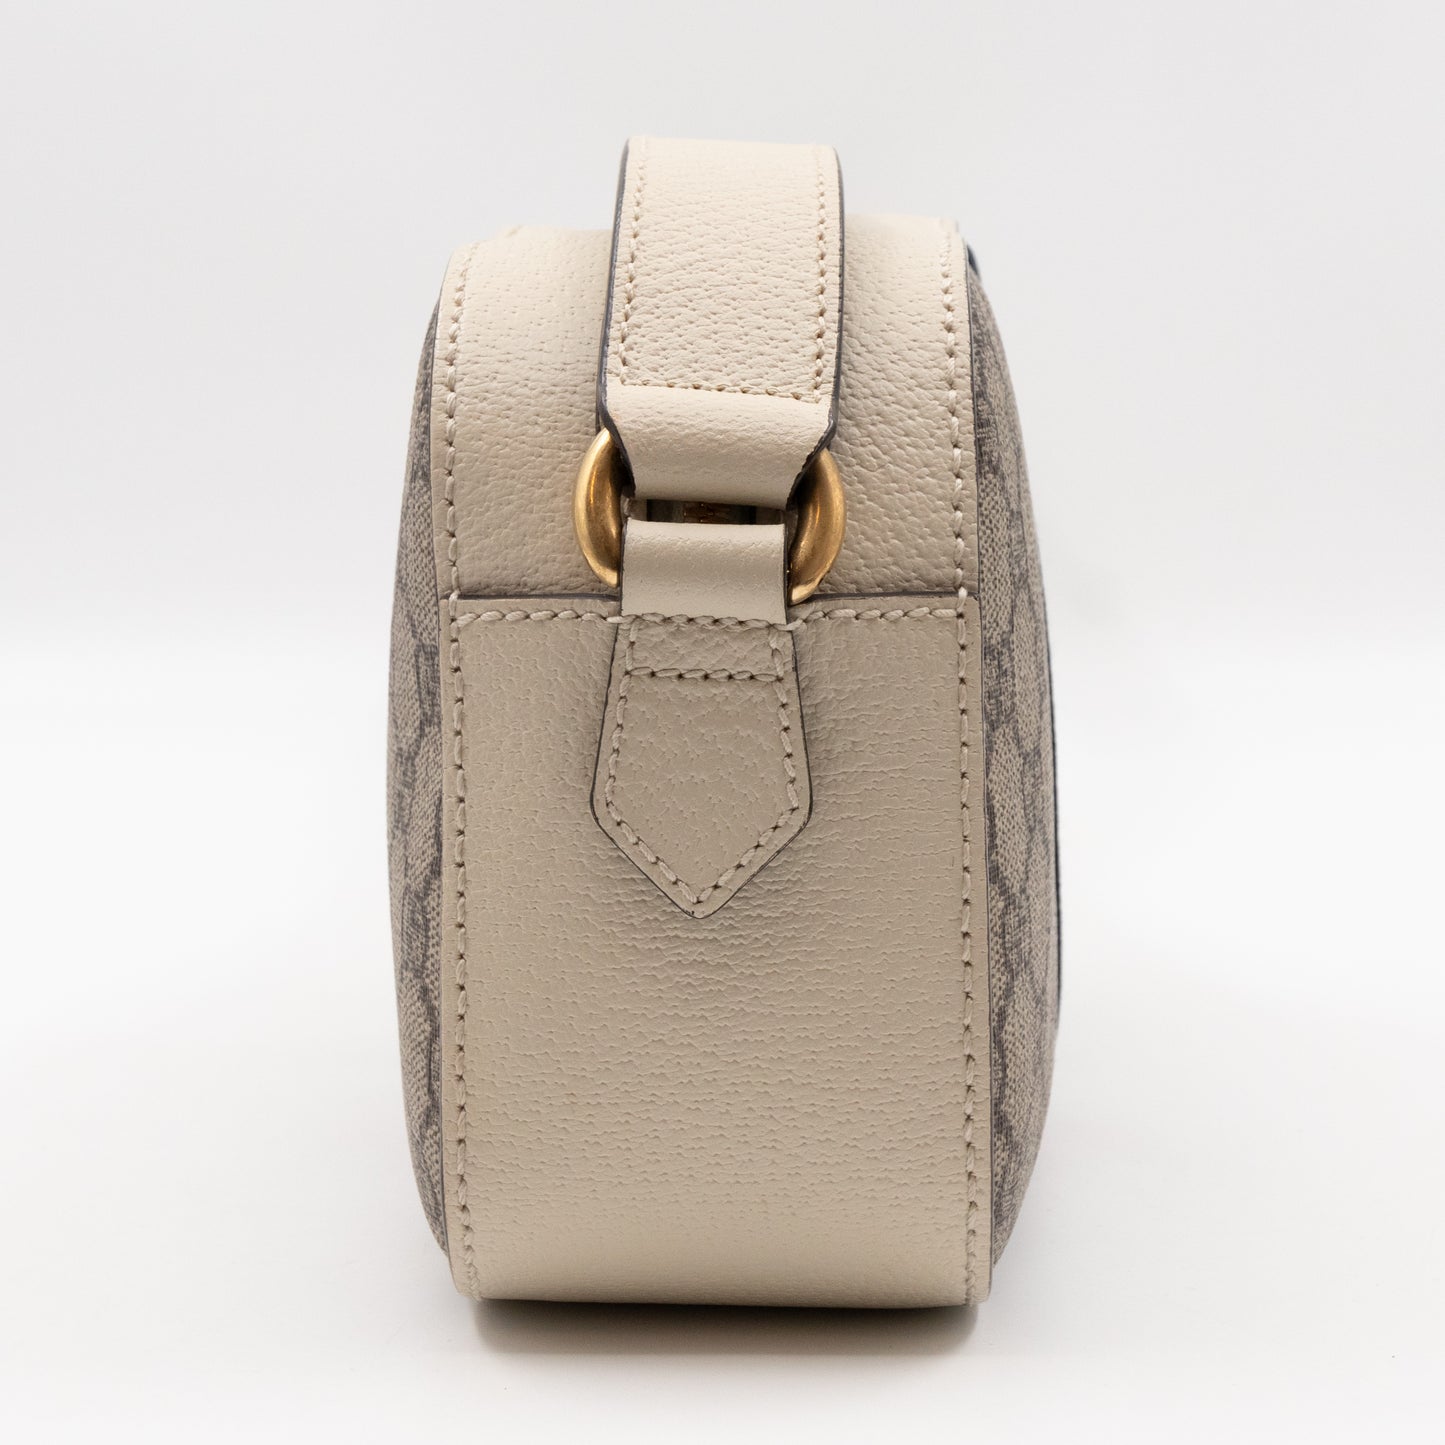 Ophidia Crossbody Bag GG Supreme White Leather